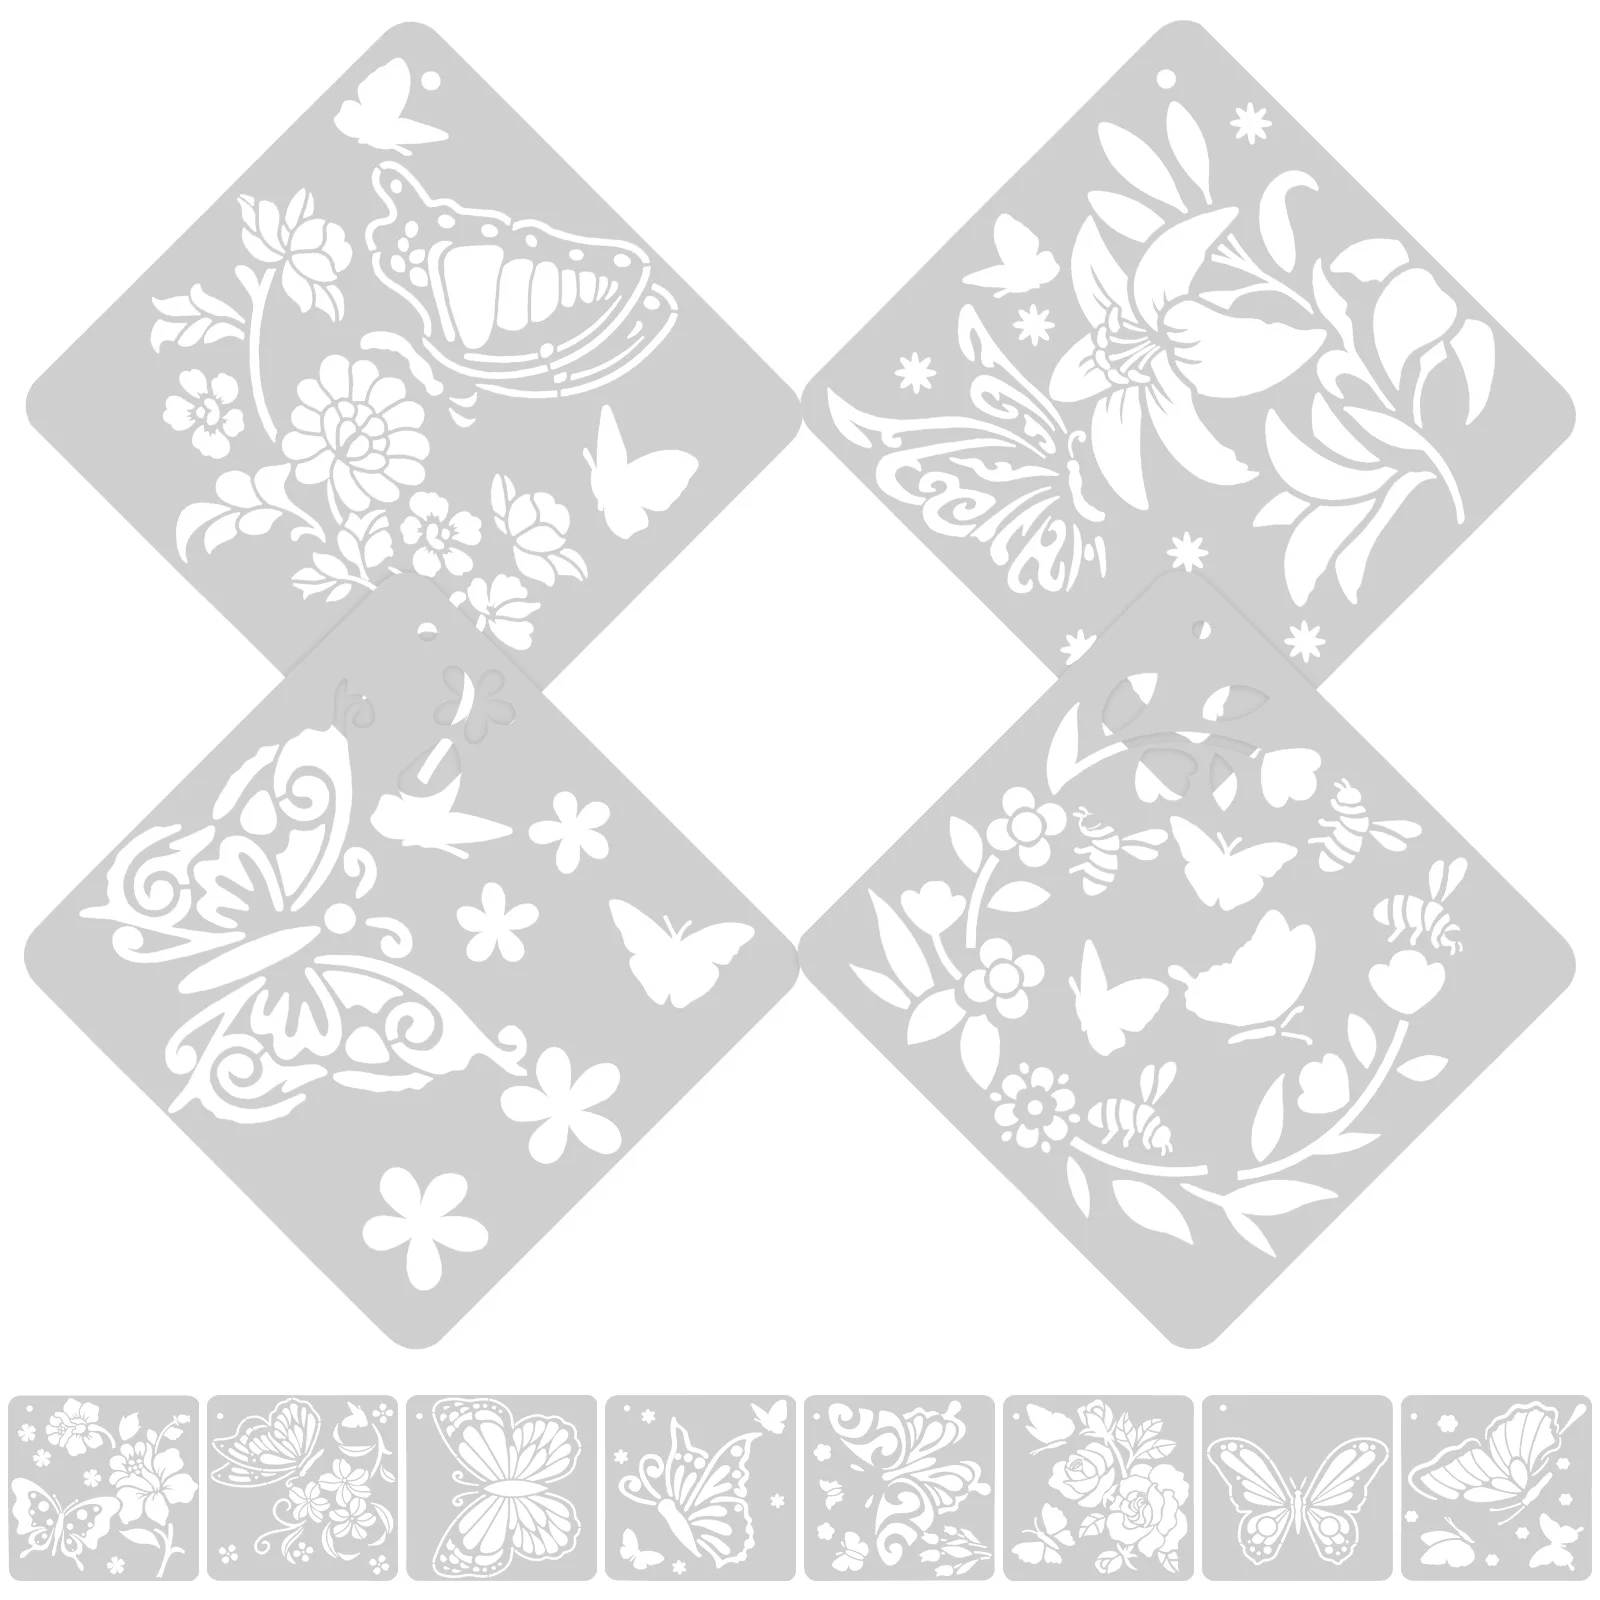 Butterfly Stencil Butterfly Painting Stencil Craft Stencil Large Stencils Coloring Embossing Album rectangular pattern plastic stencil for diy scrapbook stencil embossed decoration photo album paper card handmade craft stencil